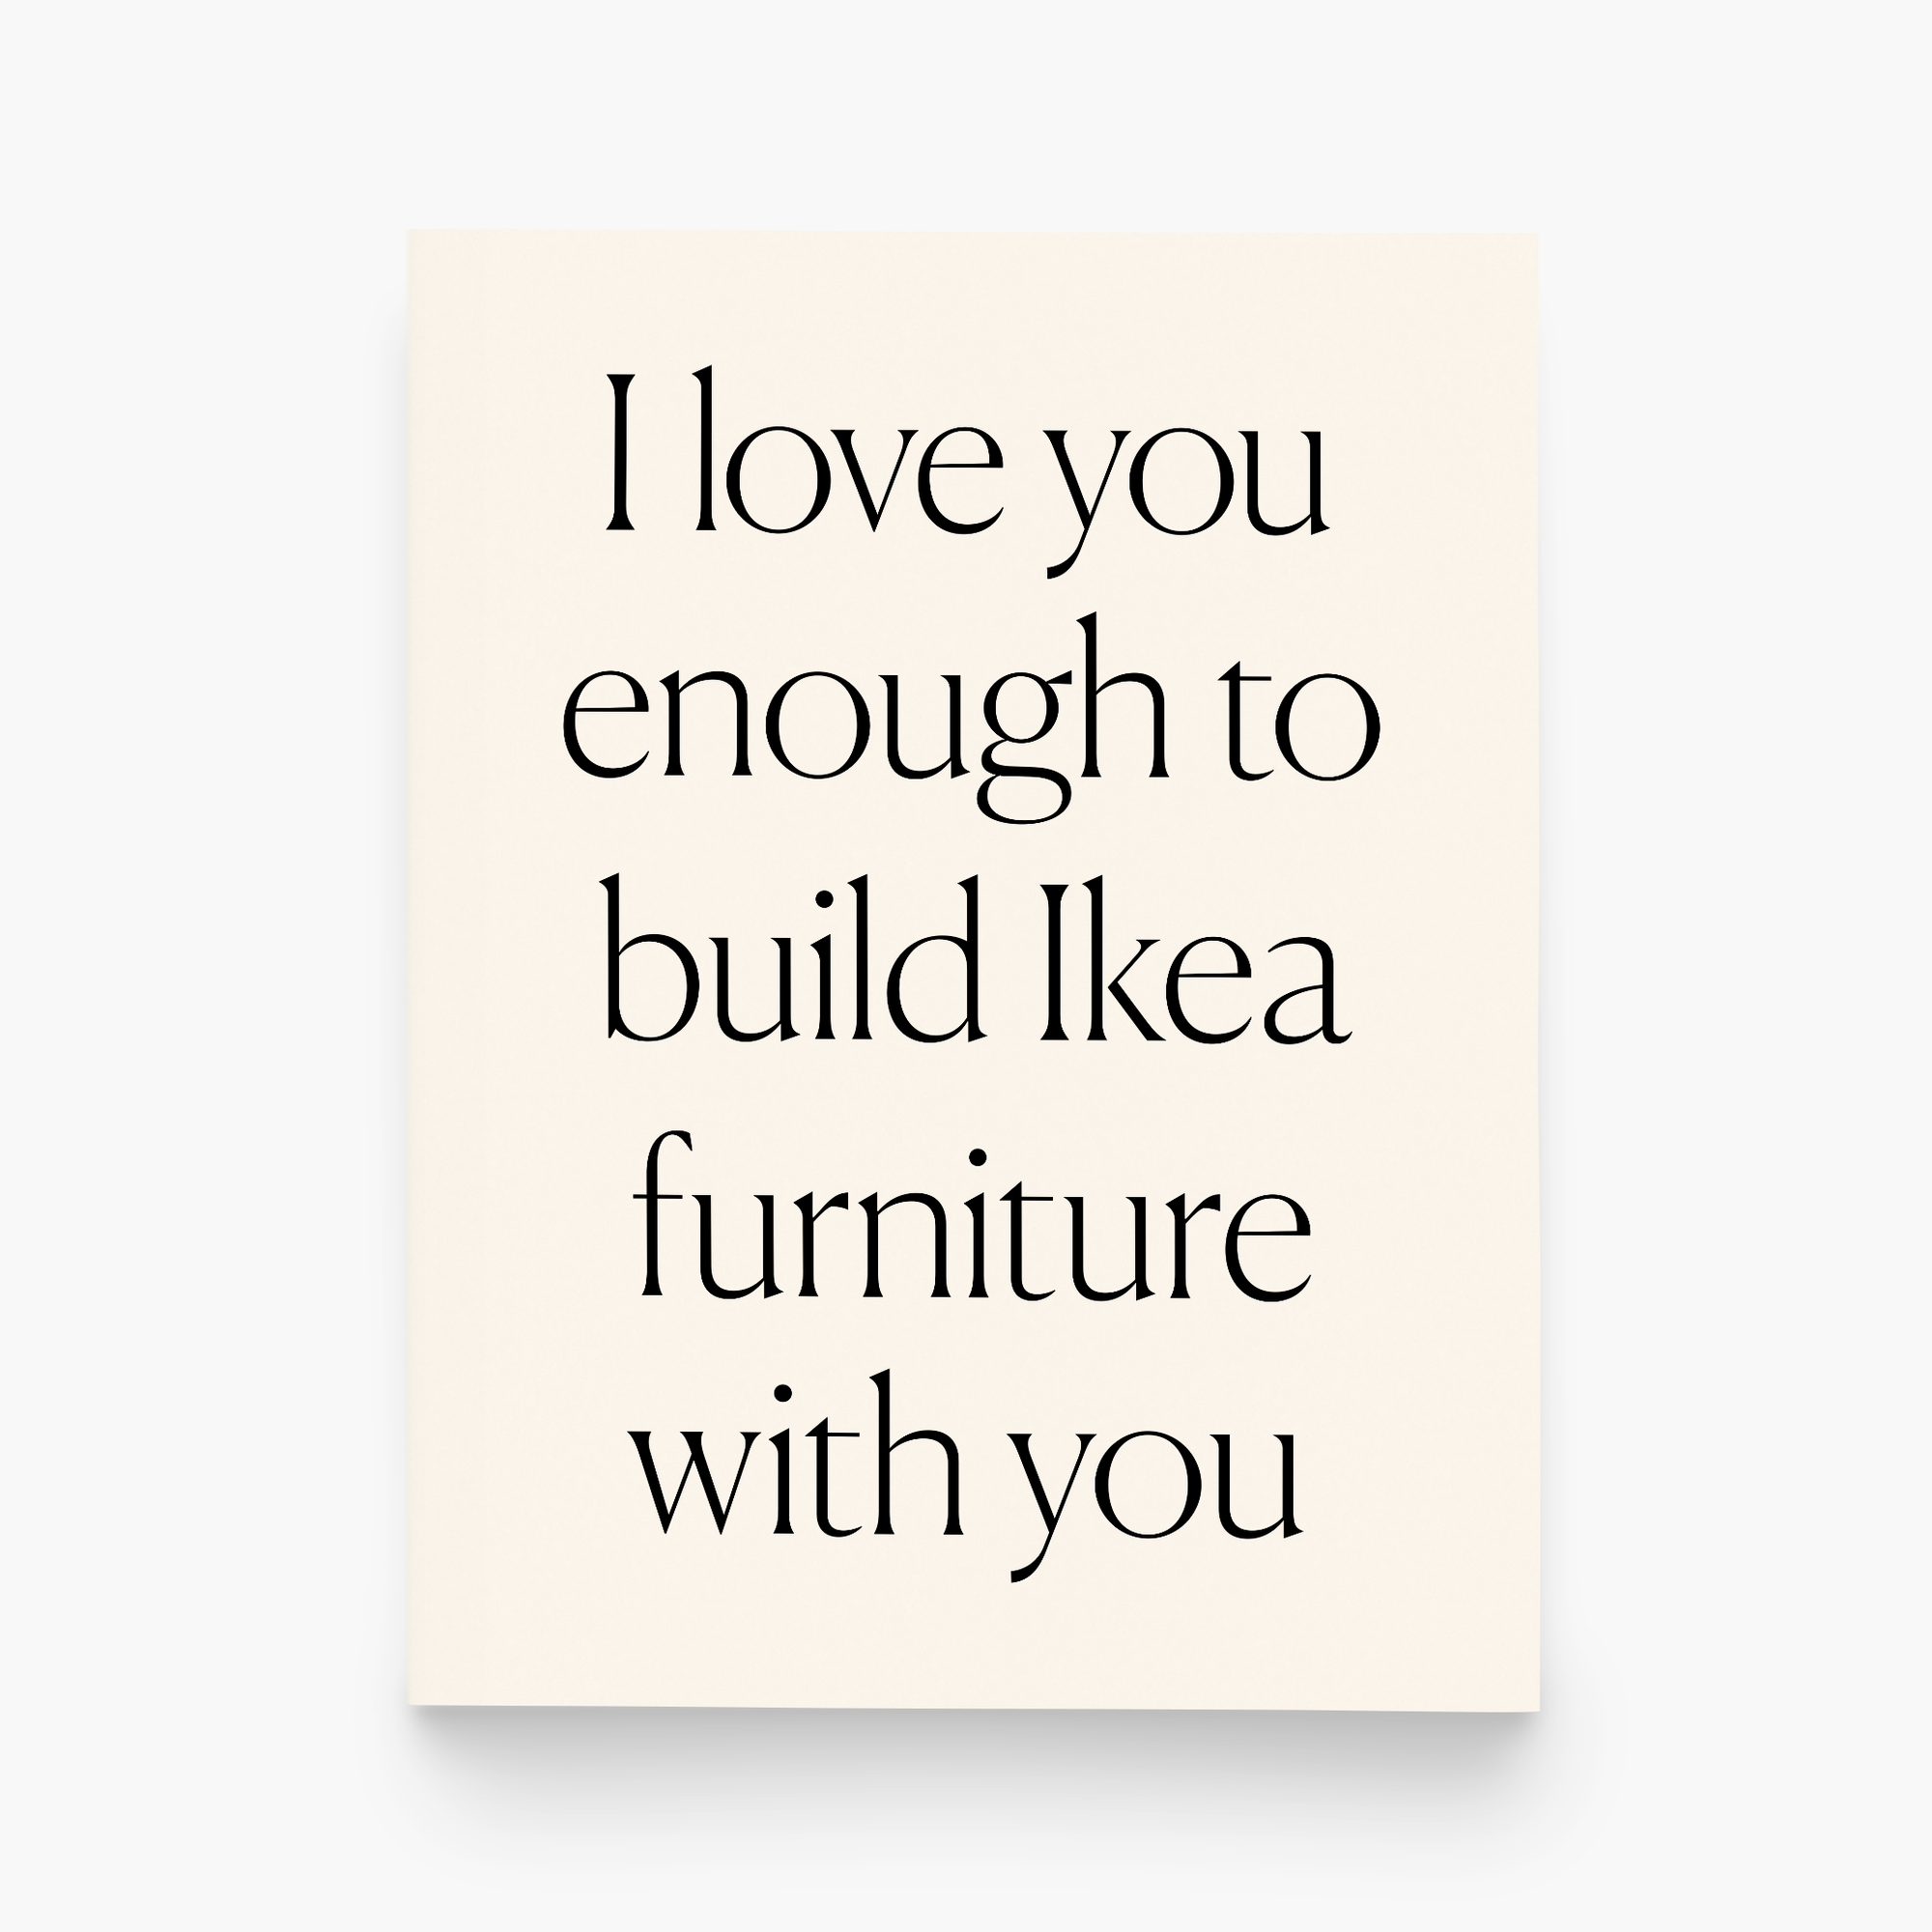 Build Ikea with You Greeting Card